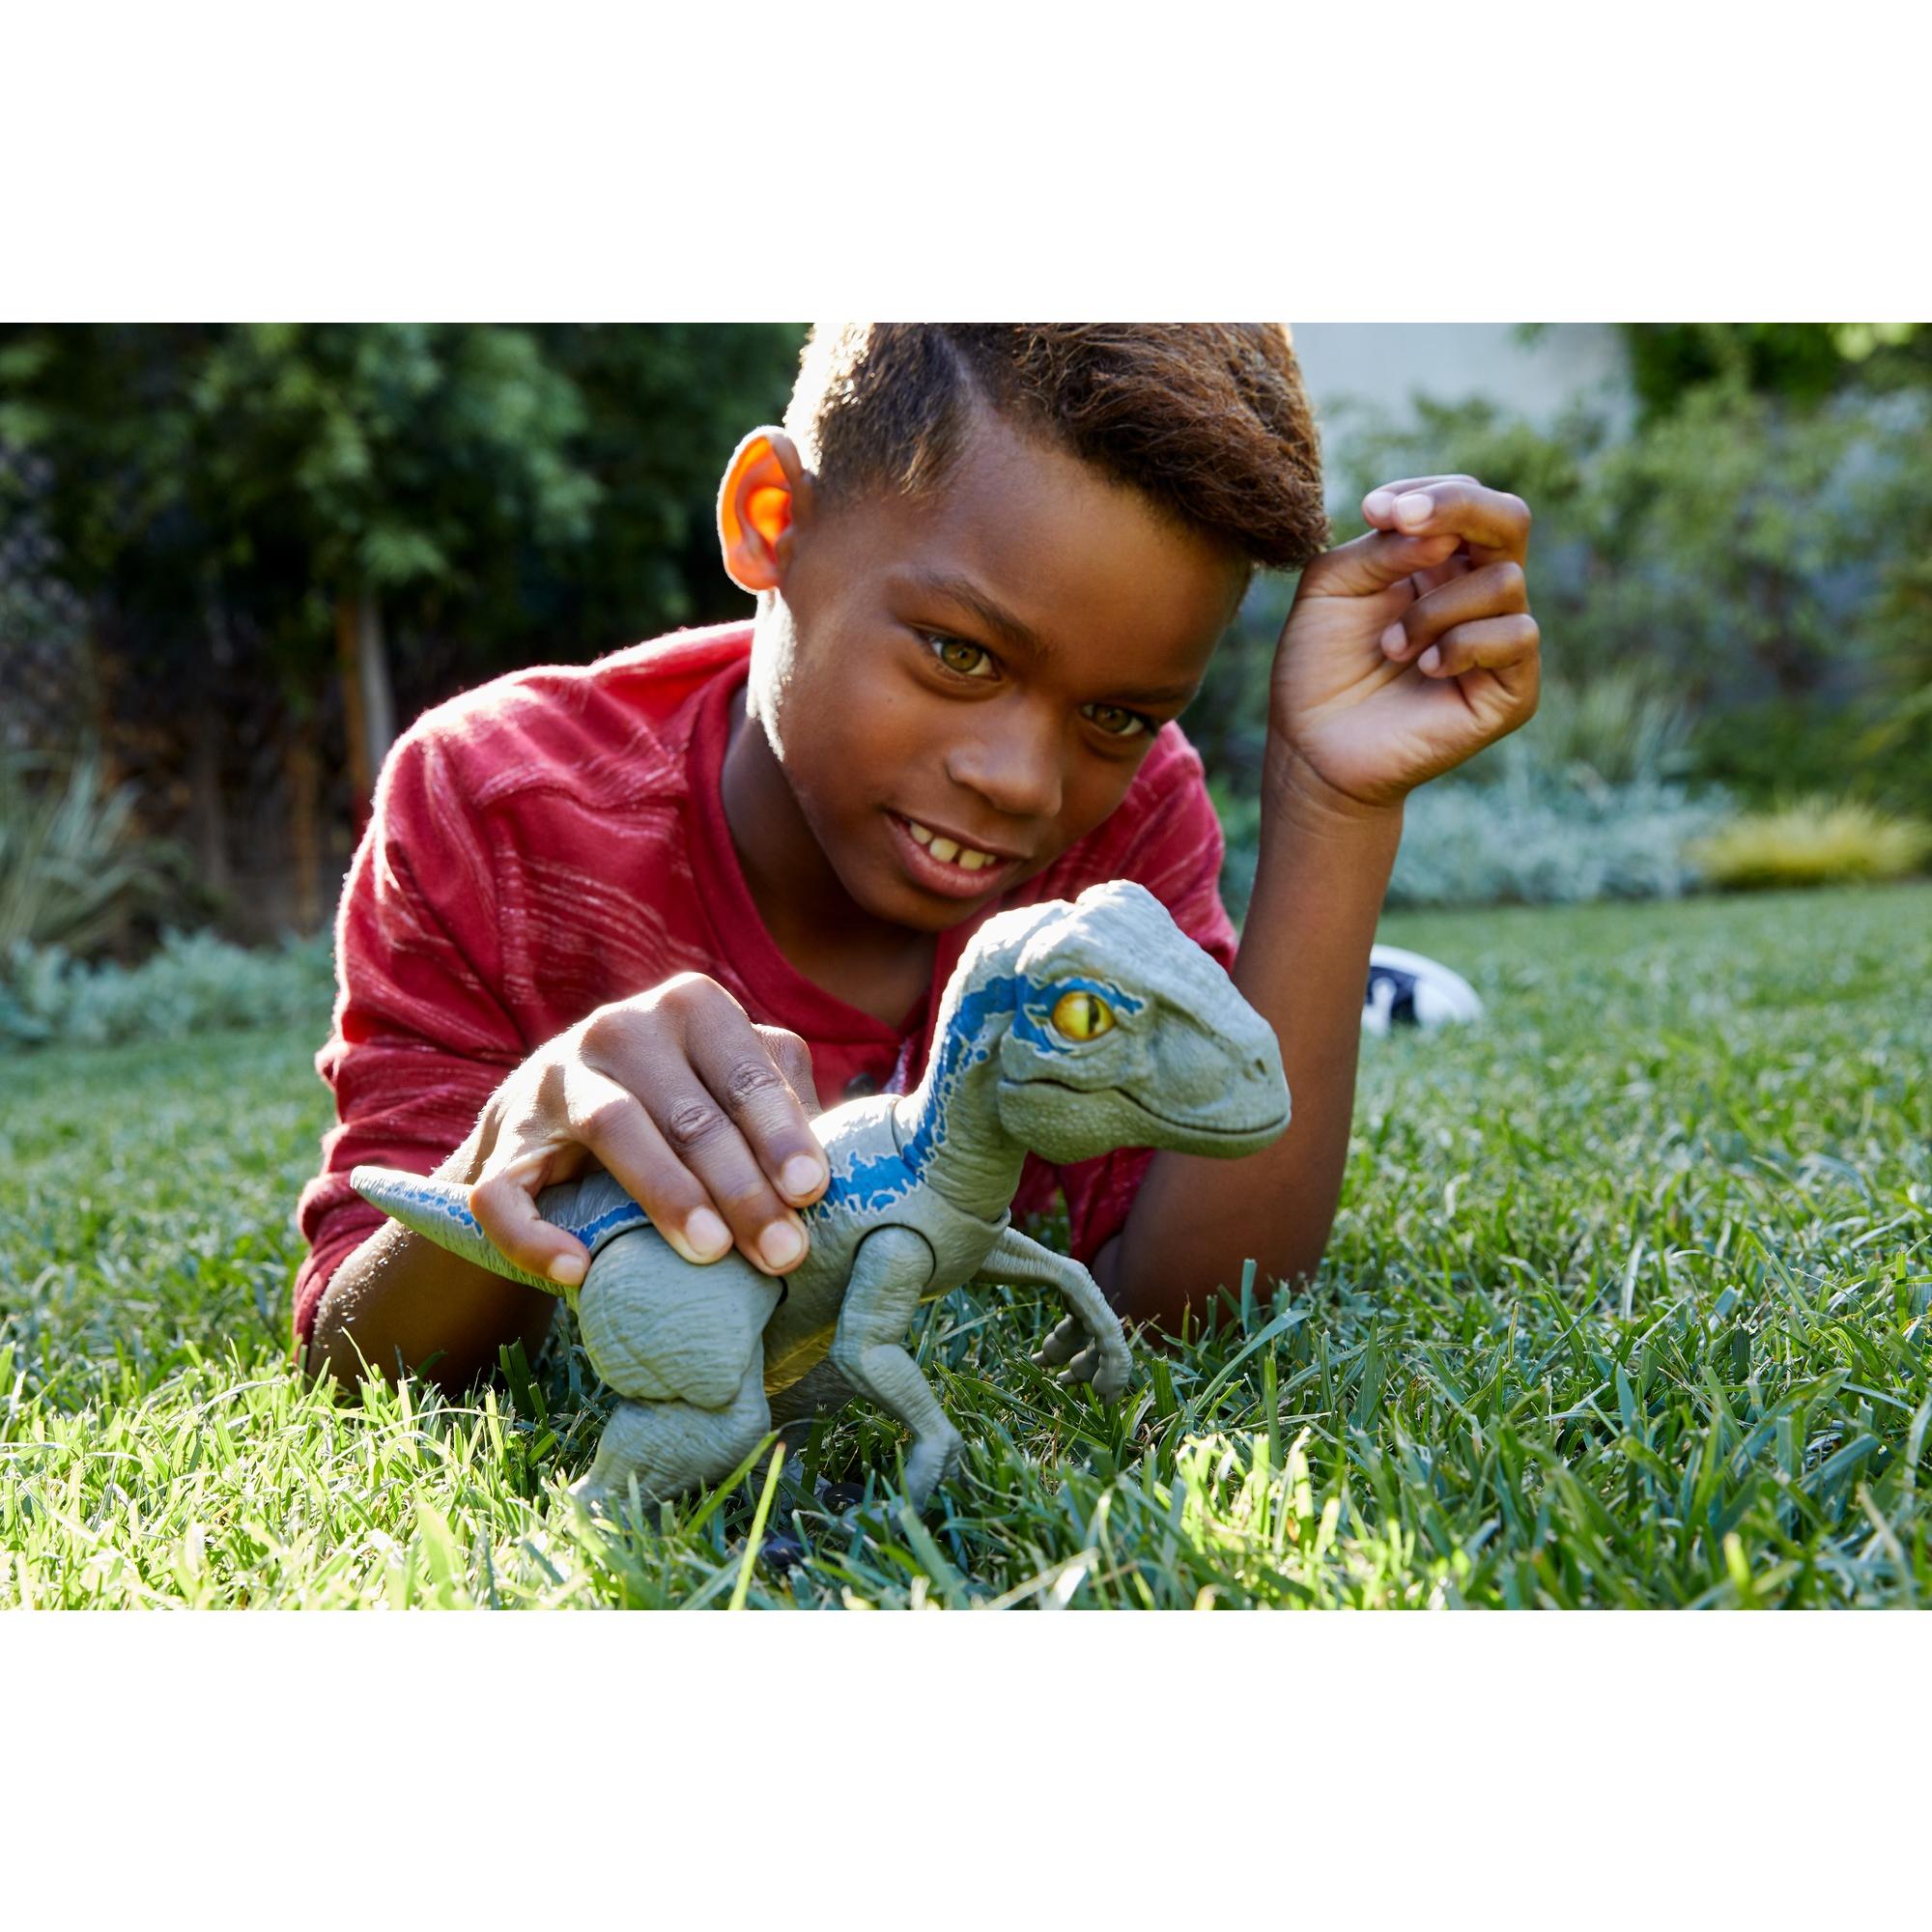 Jurassic World Primal Pal Blue With Spring-Moving Action, Sound Effects And Articulation - image 3 of 8